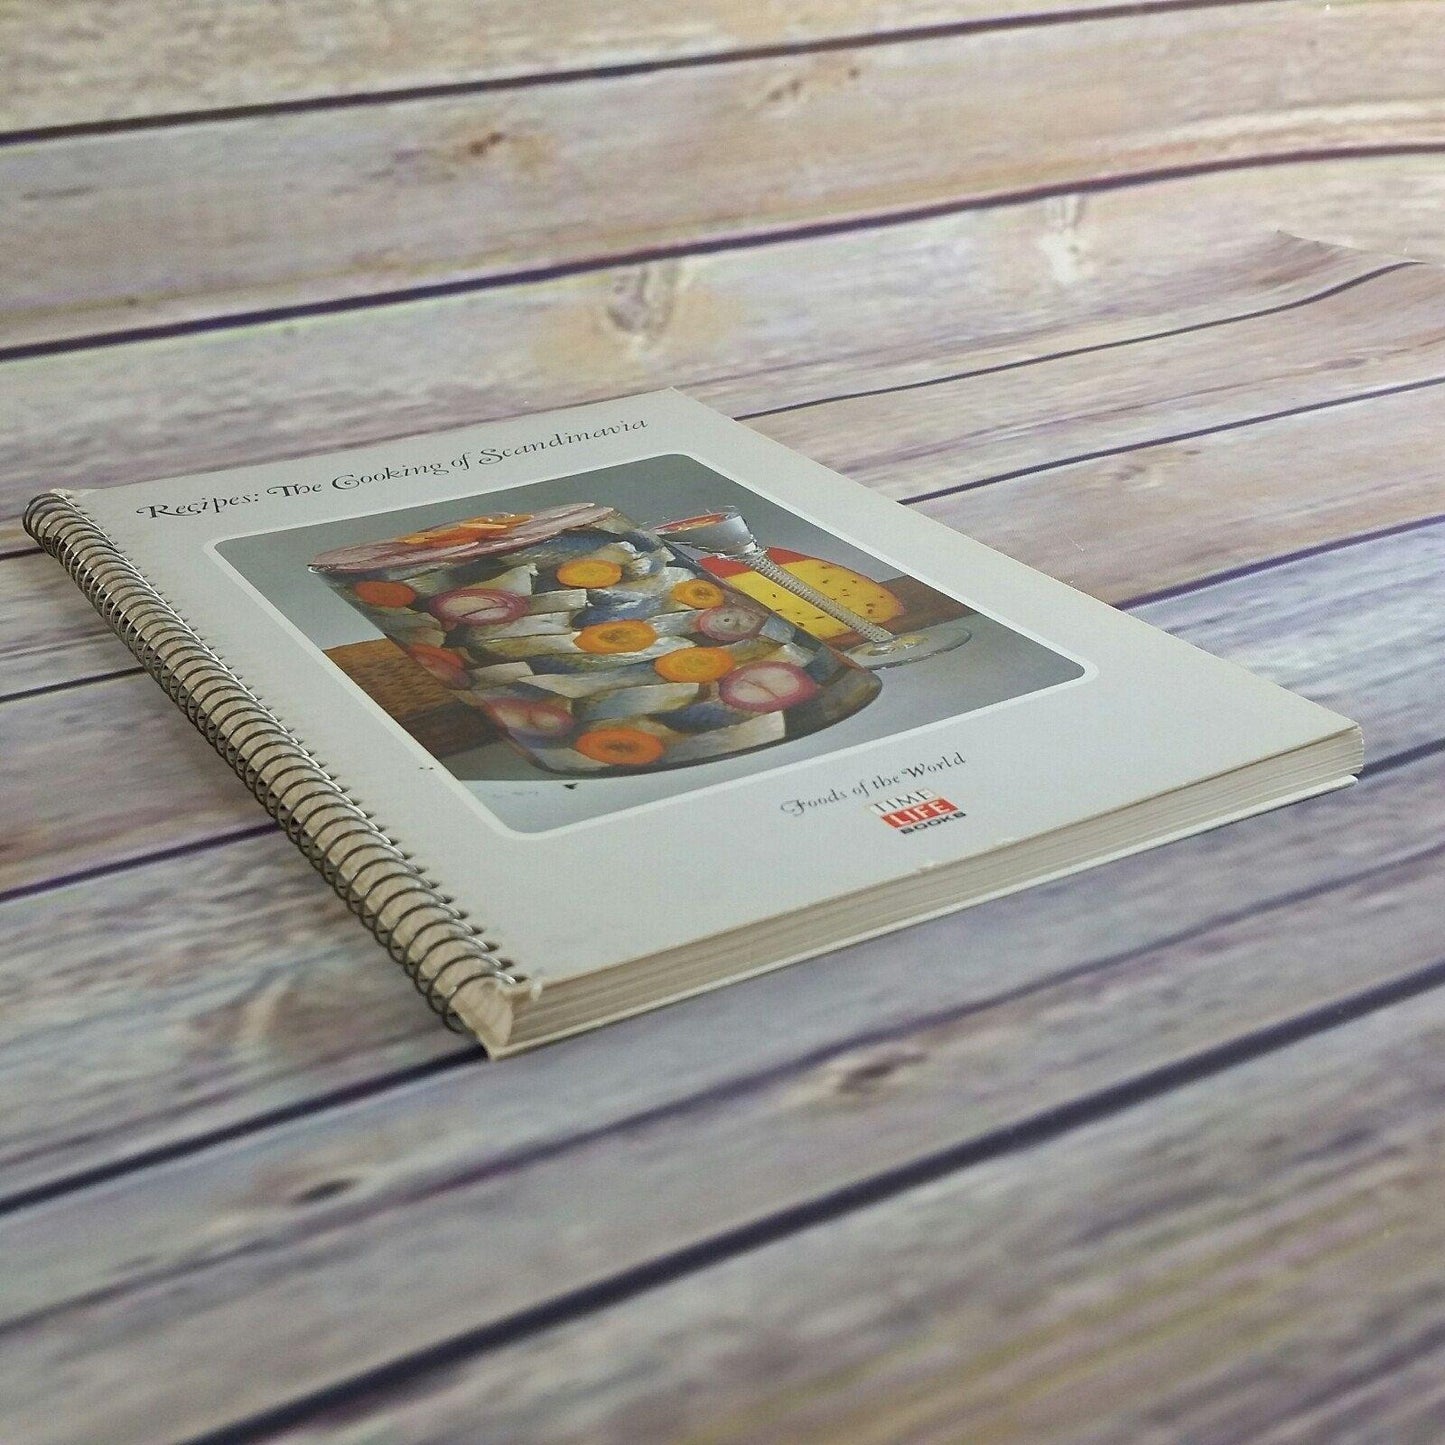 Vintage Cookbook Scandinavian Cooking Recipes Time Life Books Foods of the World 1968 Spiral Bound The Cooking of Scandinavia